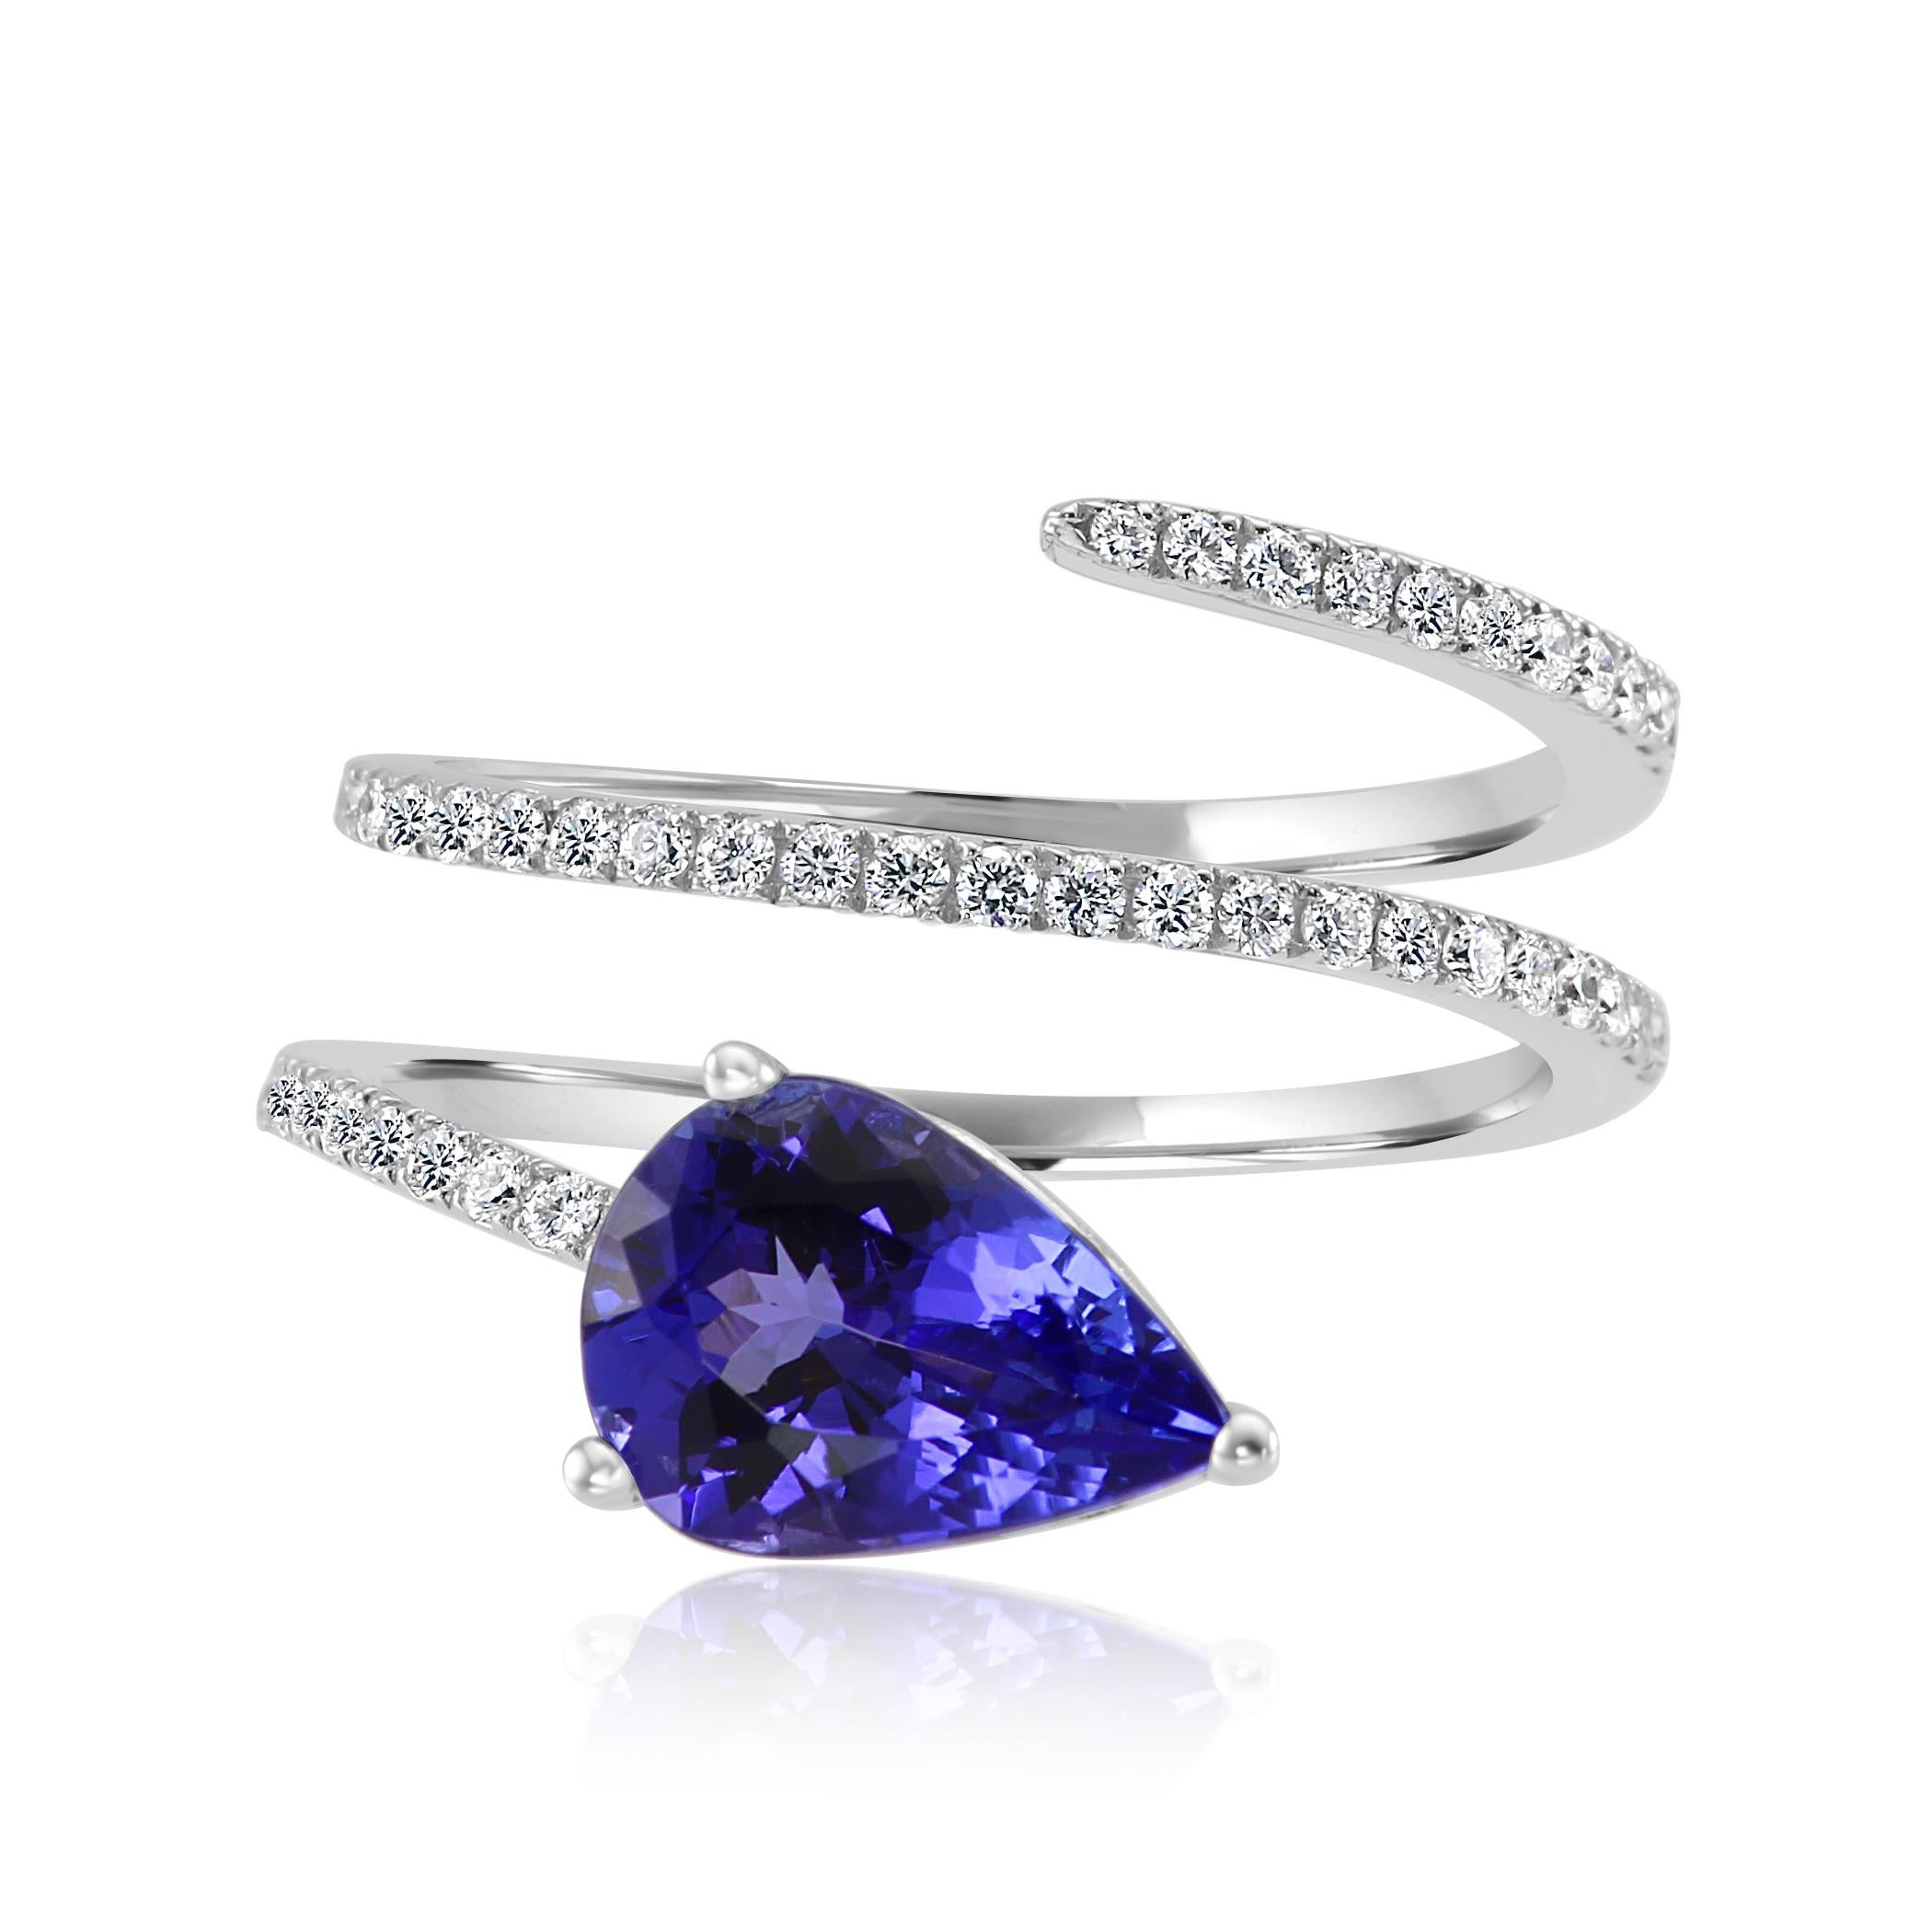  Beautiful Tanzanite Pear 1.94 Carat set  with White Diamond Rounds 0.33 carat in 14K White Gold Cocktail FashionSpiral Ring.

MADE IN USA

Tanzanite Oval Center Weight 1.94 Carat
Total Weight 2.27 Carat 